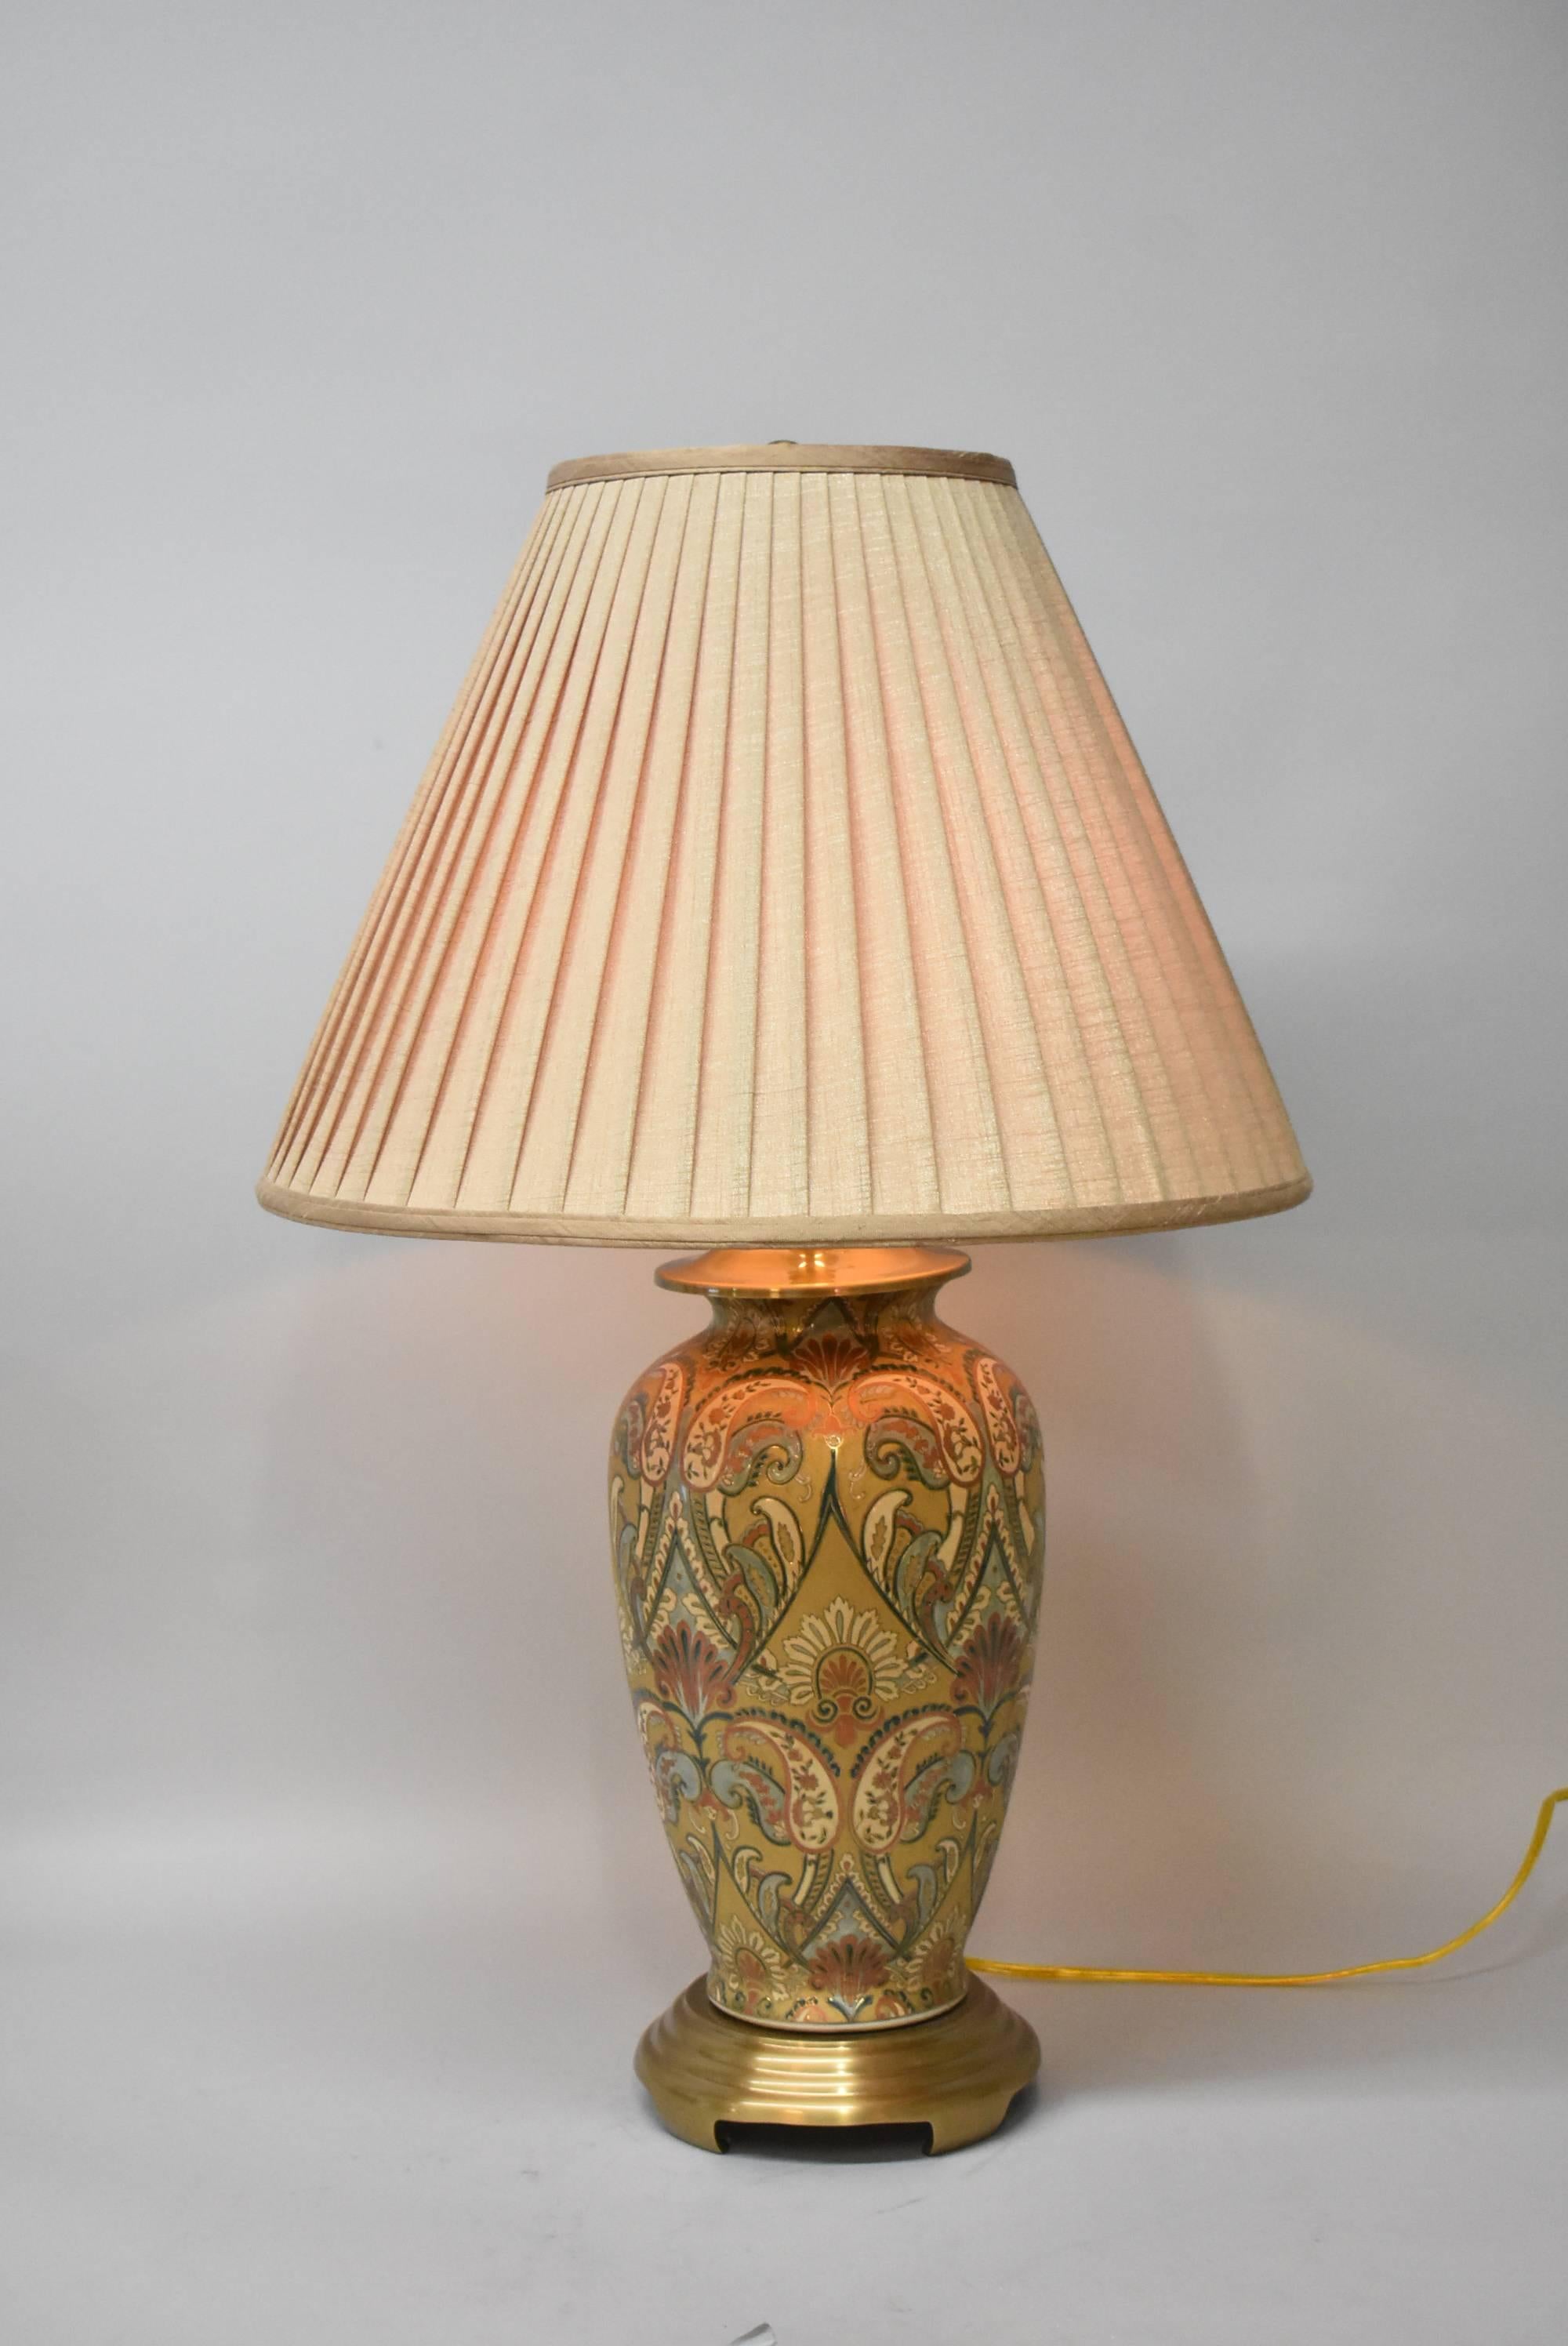 An absolutely beautiful Asian style table lamp by Frederick Cooper. This stunning ginger jar lamp features a paisley design in turquoise, rust, gold and green. There is one socket. The dimensions are 32